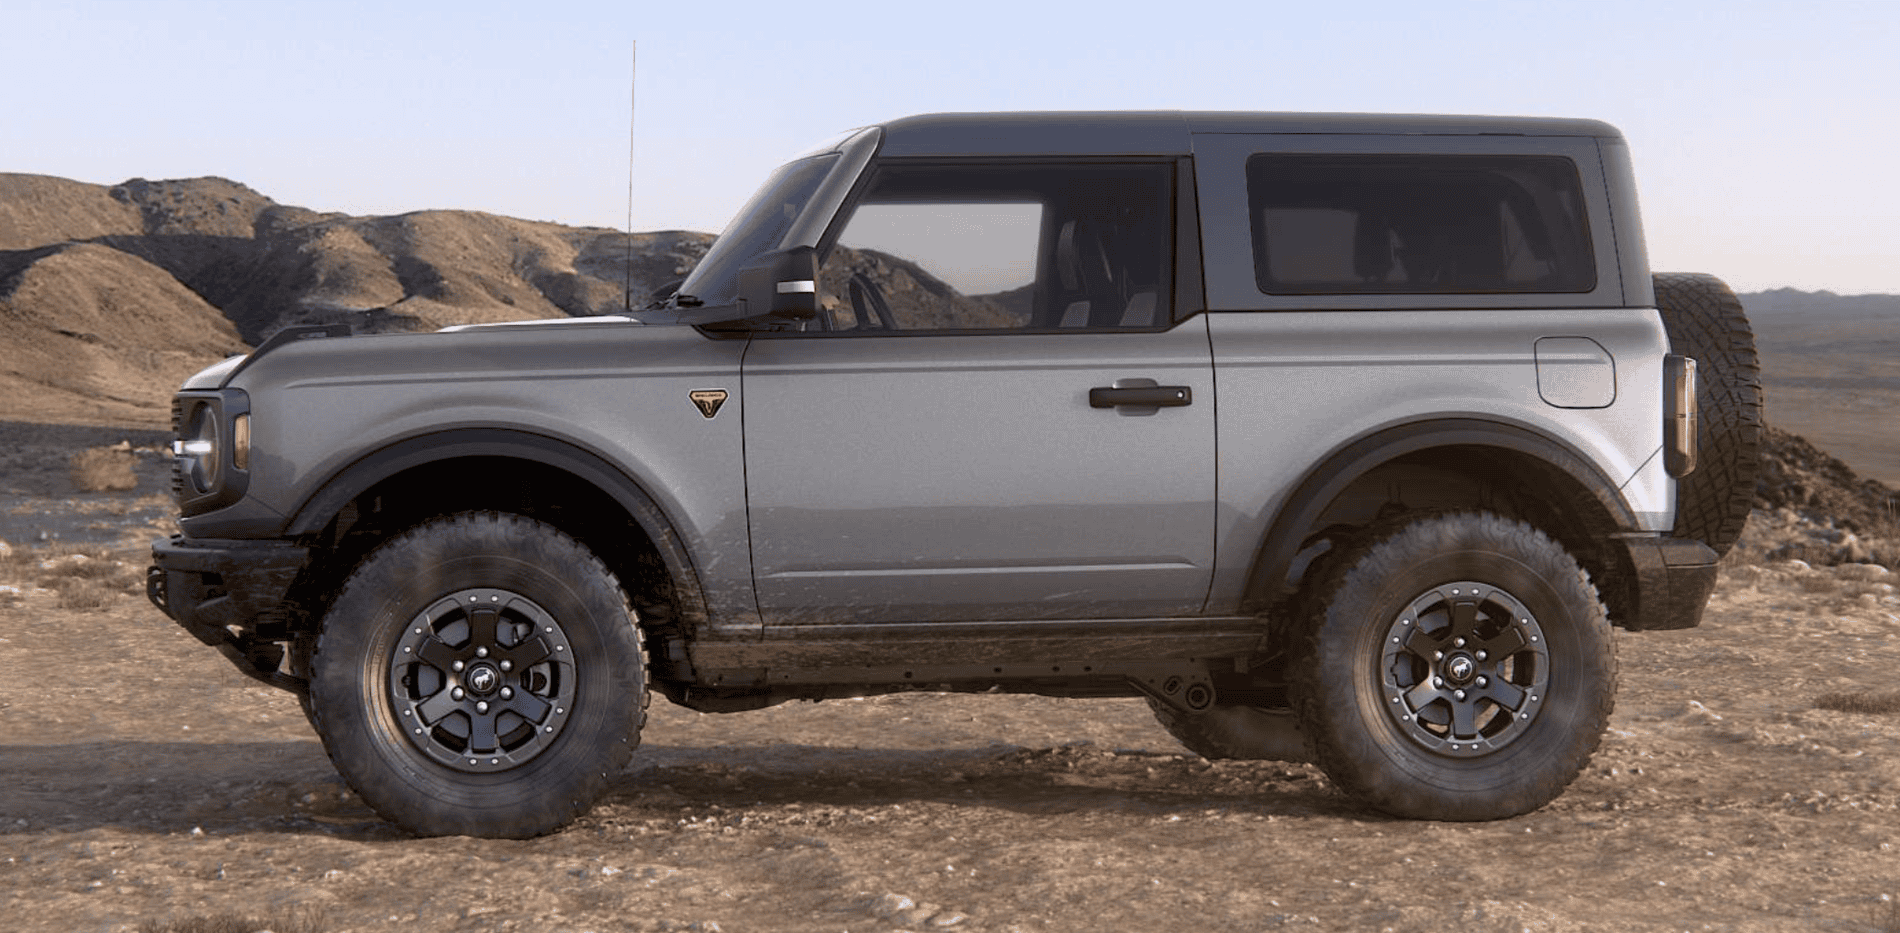 Ford Bronco Anyone Changing Color Due to MIC Top Announcement? Screen Shot 2020-10-25 at 7.10.11 AM